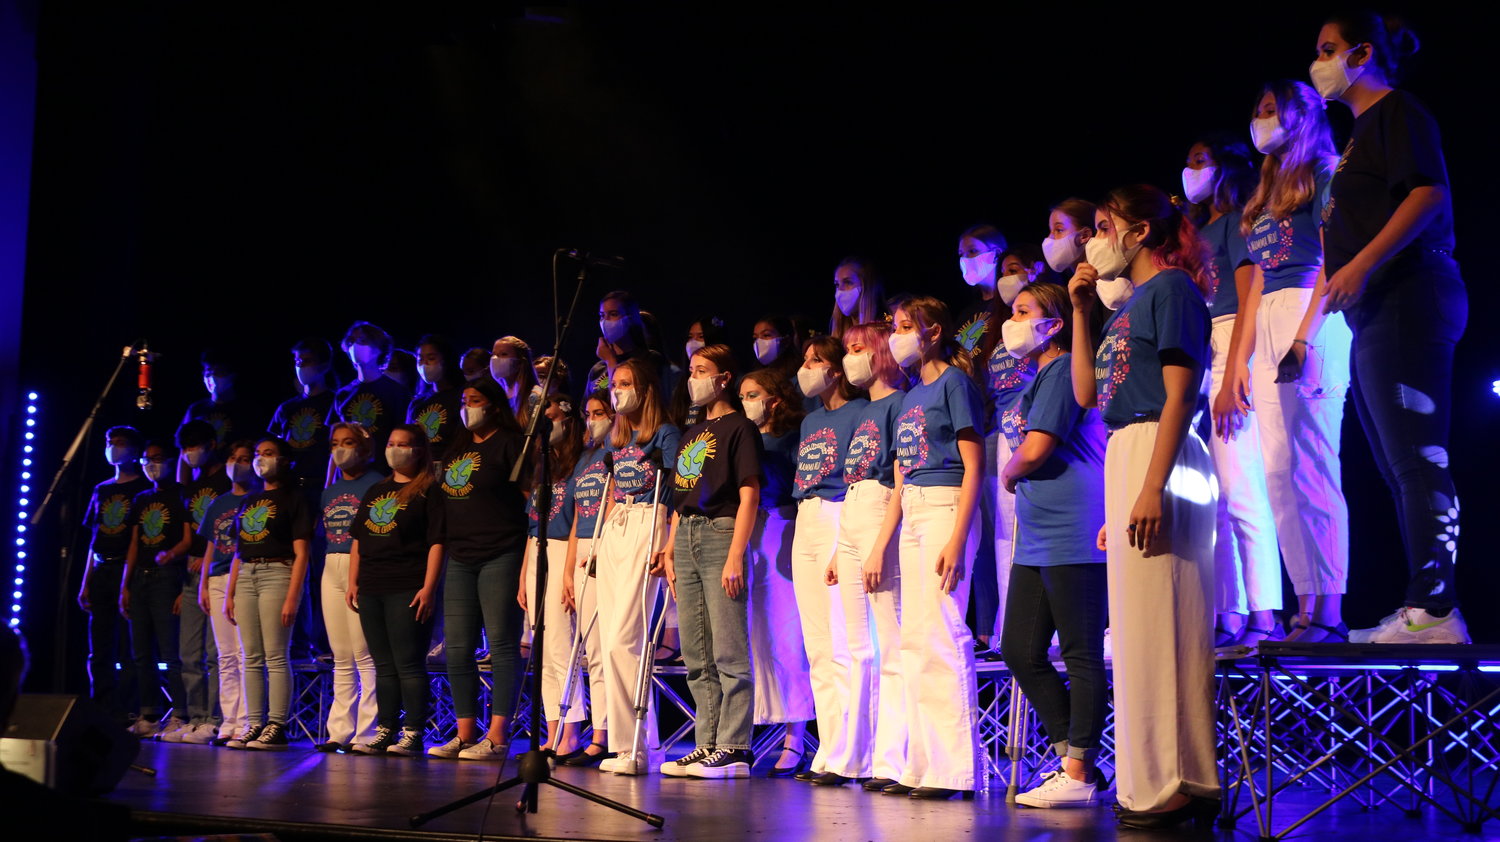 The 80-member Honors Chorus performs during a concert at Nease High School on Thursday, May 13.